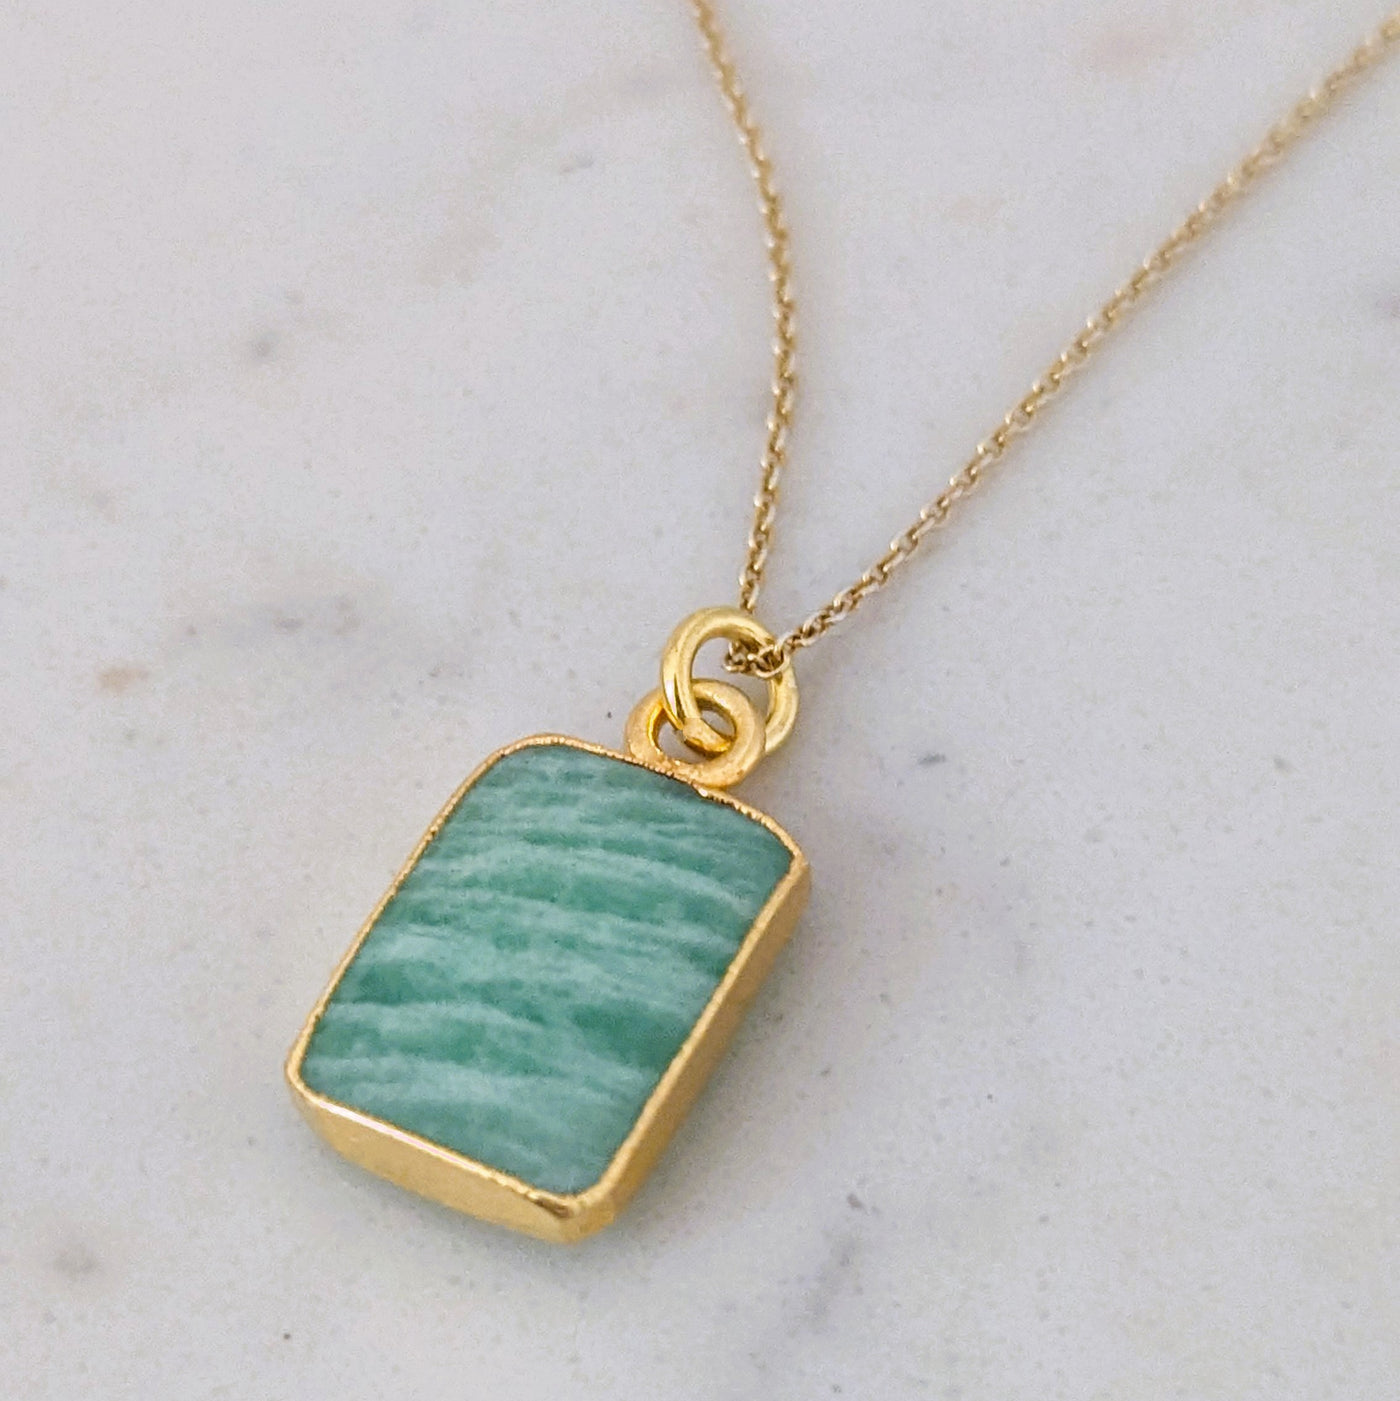 The Rectangle Amazonite Gemstone Necklace - 18ct Gold Plated